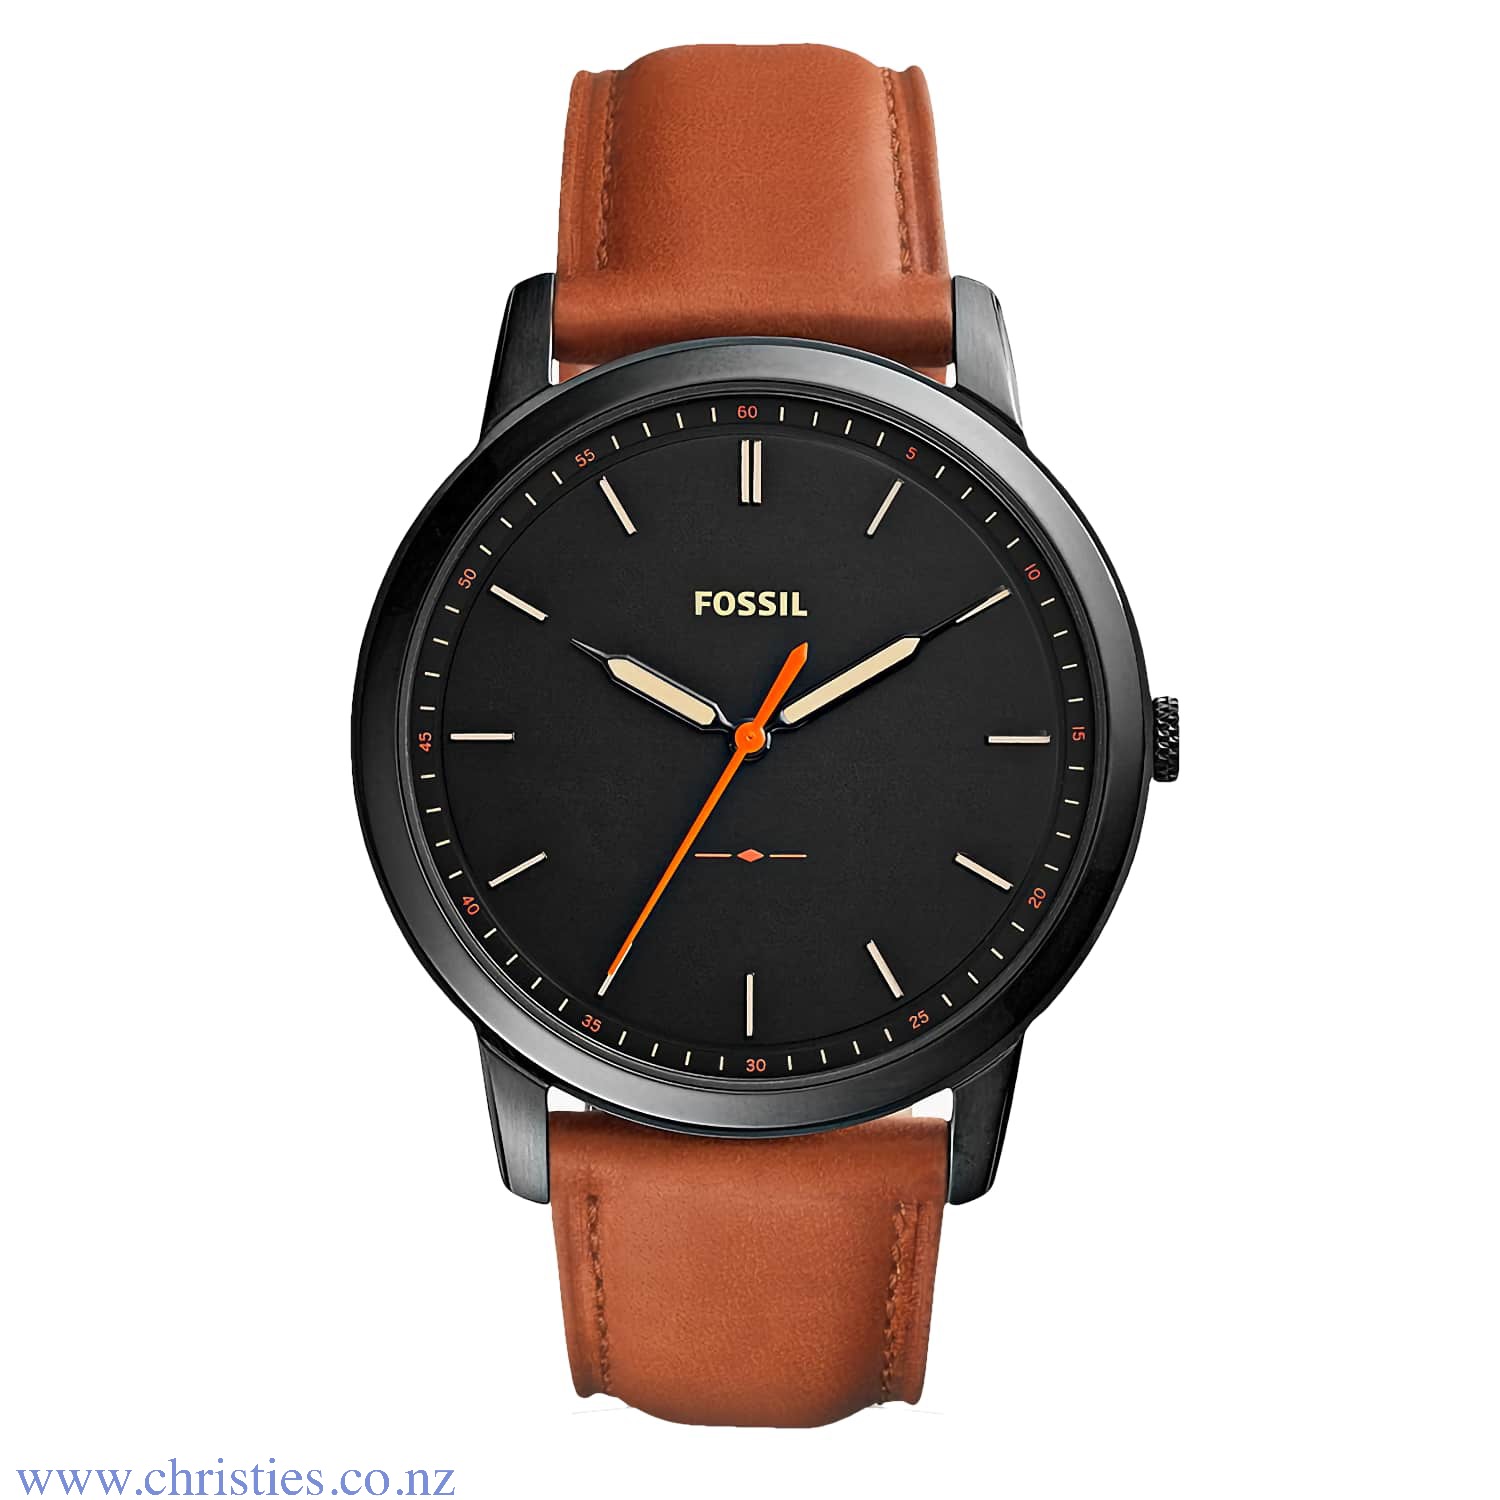 FS5305 Fossil The Minimalist Slim Light Brown Leather Watch. FS5305 Fossil The Minimalist Slim Light Brown Leather Watch 50 Metres Water Reistant Humm -Buy Little things up to $1000 and choose 10 weekly or 5 fortnightly payments with no interest. Late pay